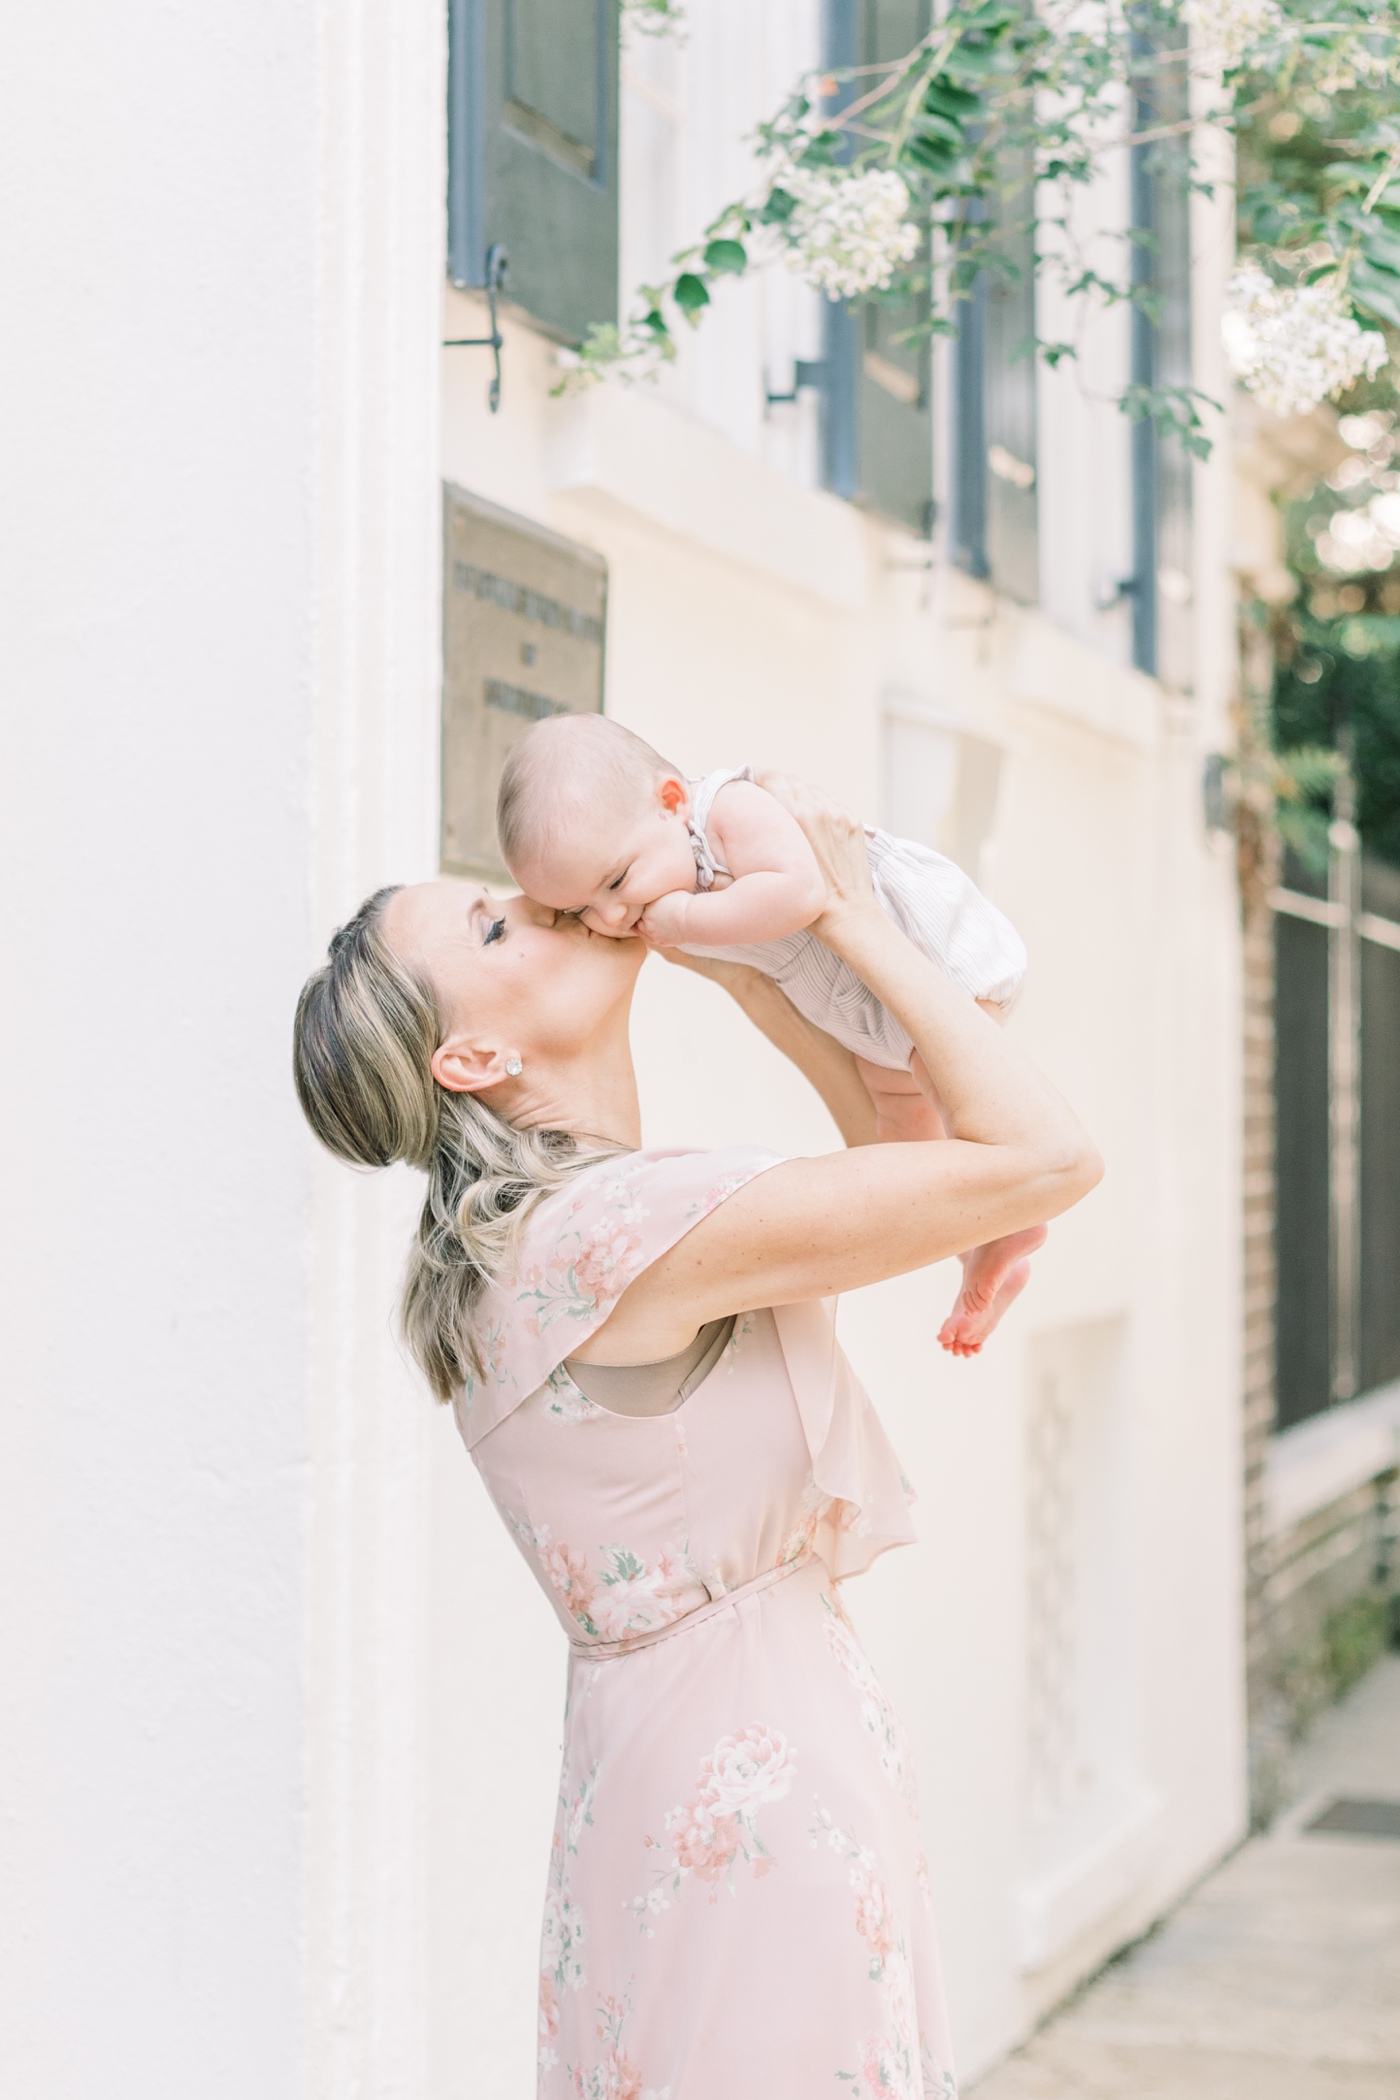 Mom playing airplane with and kissing baby in downtown Charleston. Photo by Caitlyn Motycka Photography.